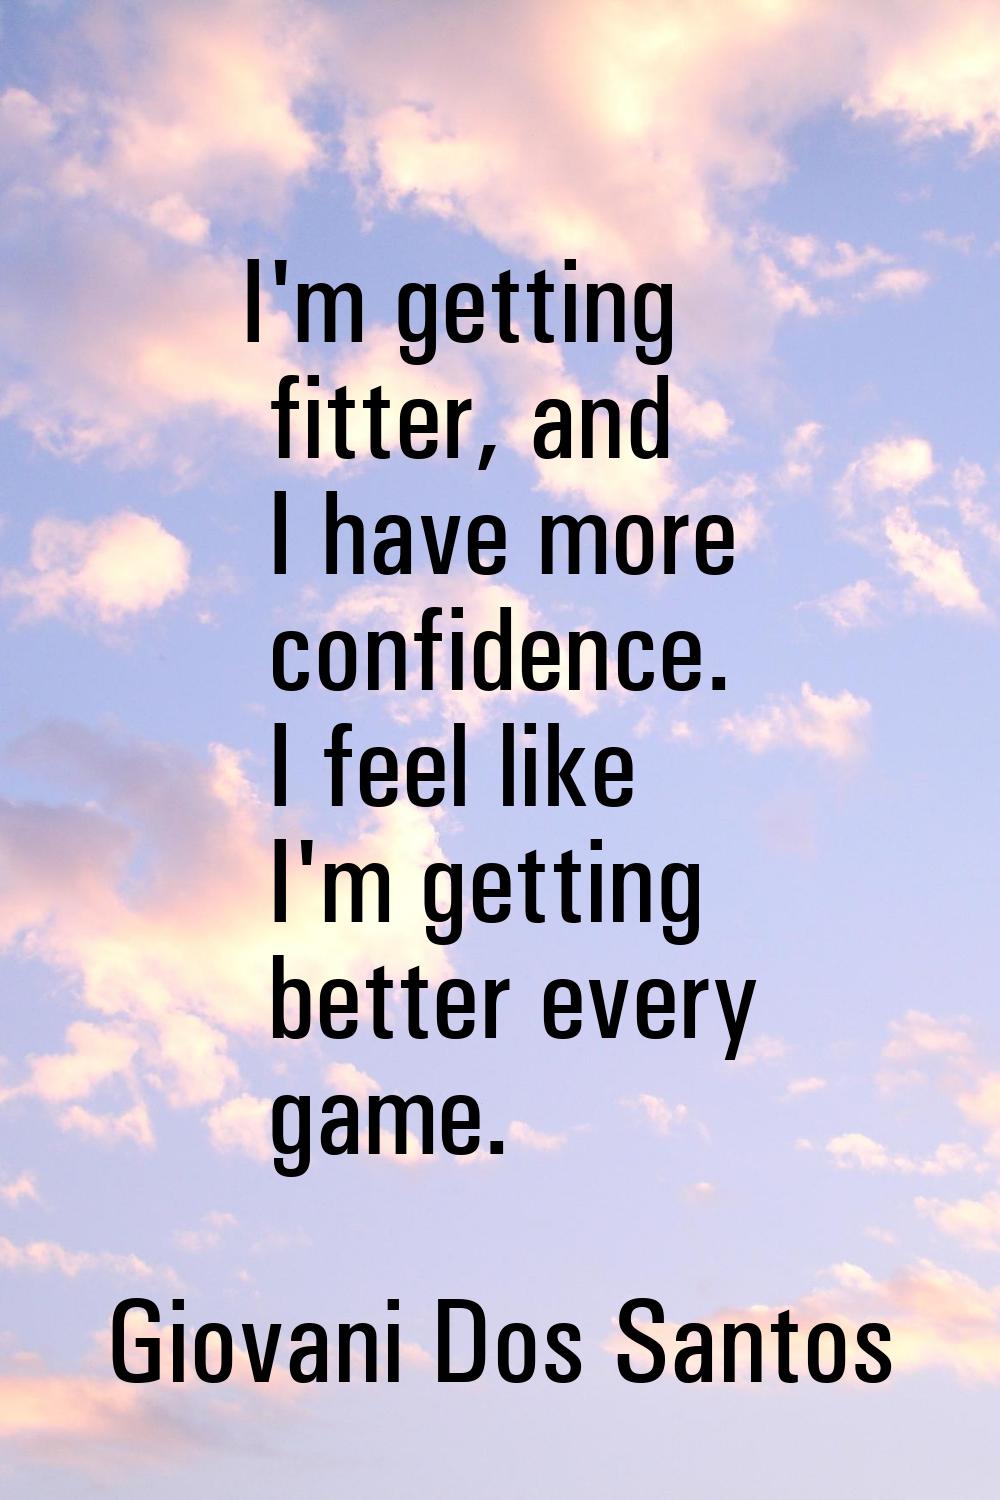 I'm getting fitter, and I have more confidence. I feel like I'm getting better every game.